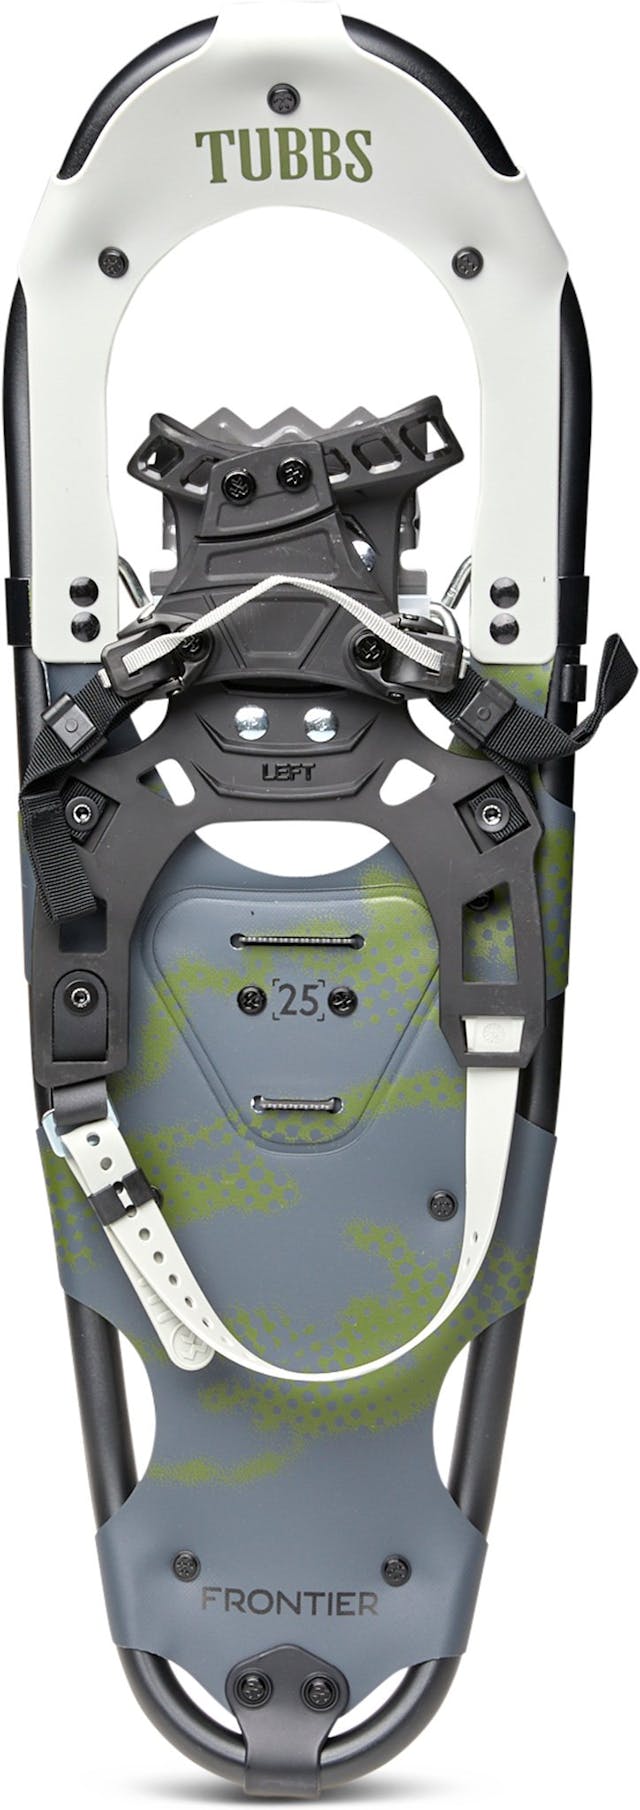 Product image for Frontier Snowshoes - Women's